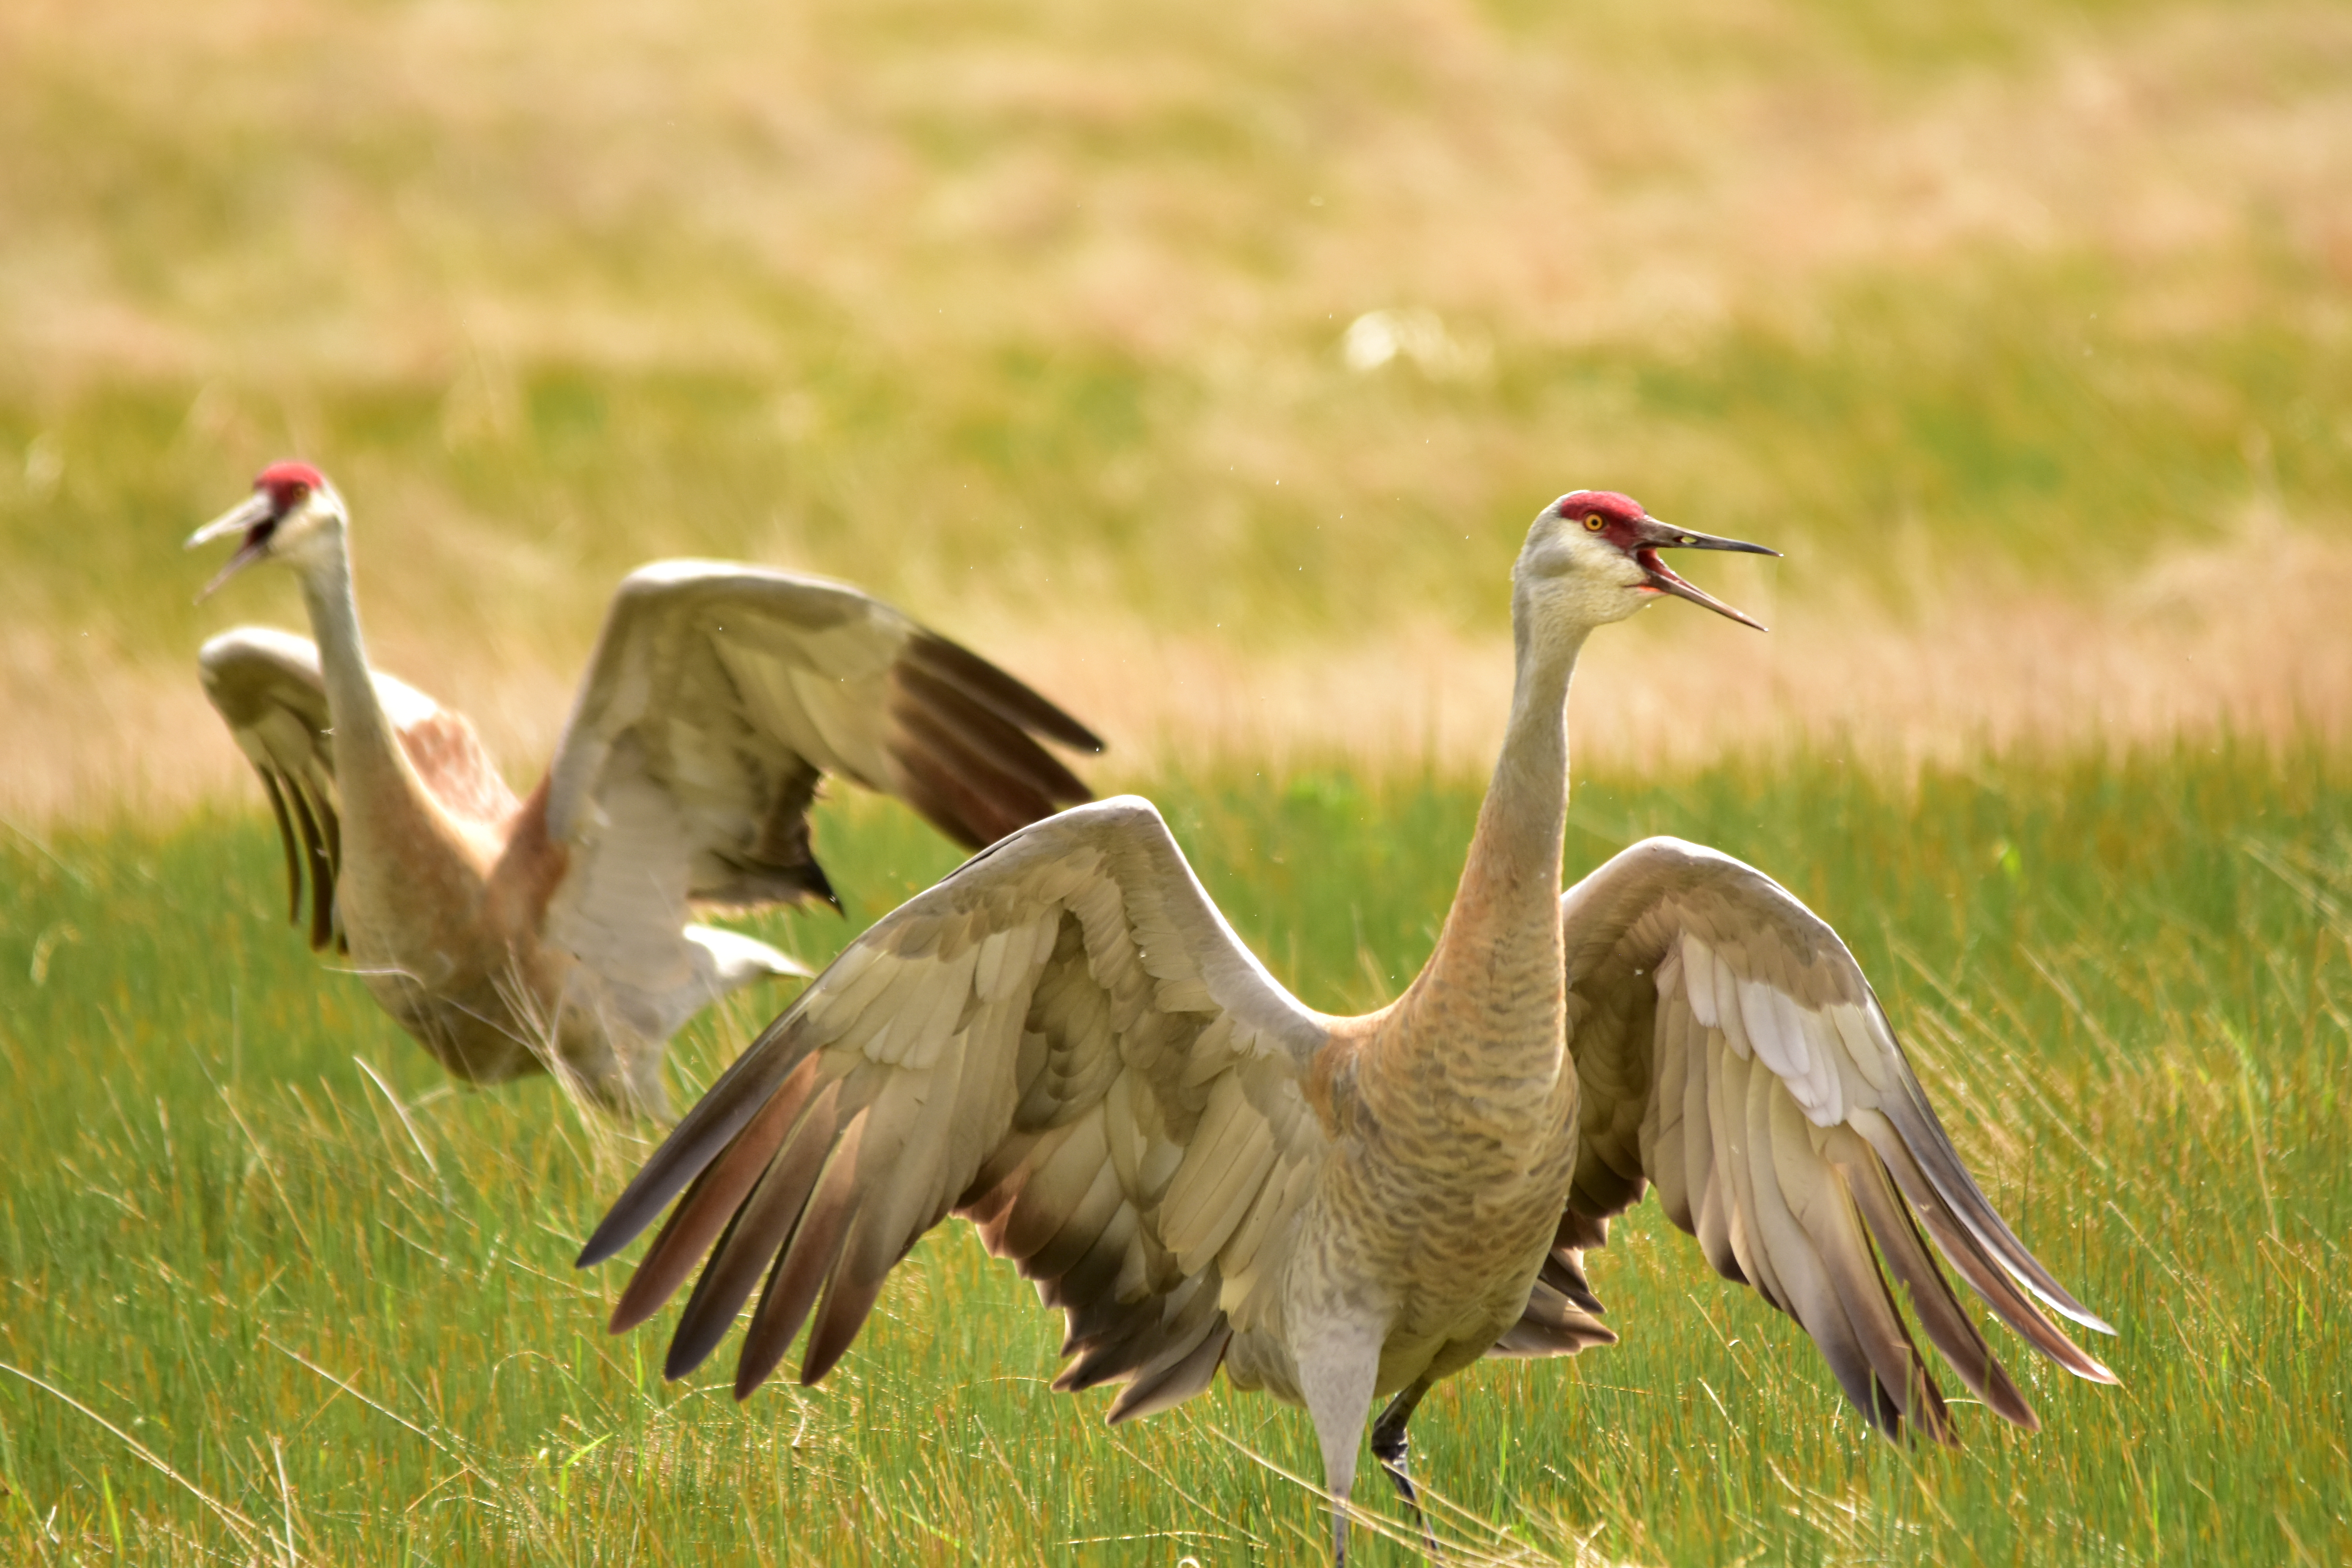 Two big brown and white birds called sandhill cranes walk through grass and show off their large wings at Seedskadee National Wildlife Refuge in Wyoming.